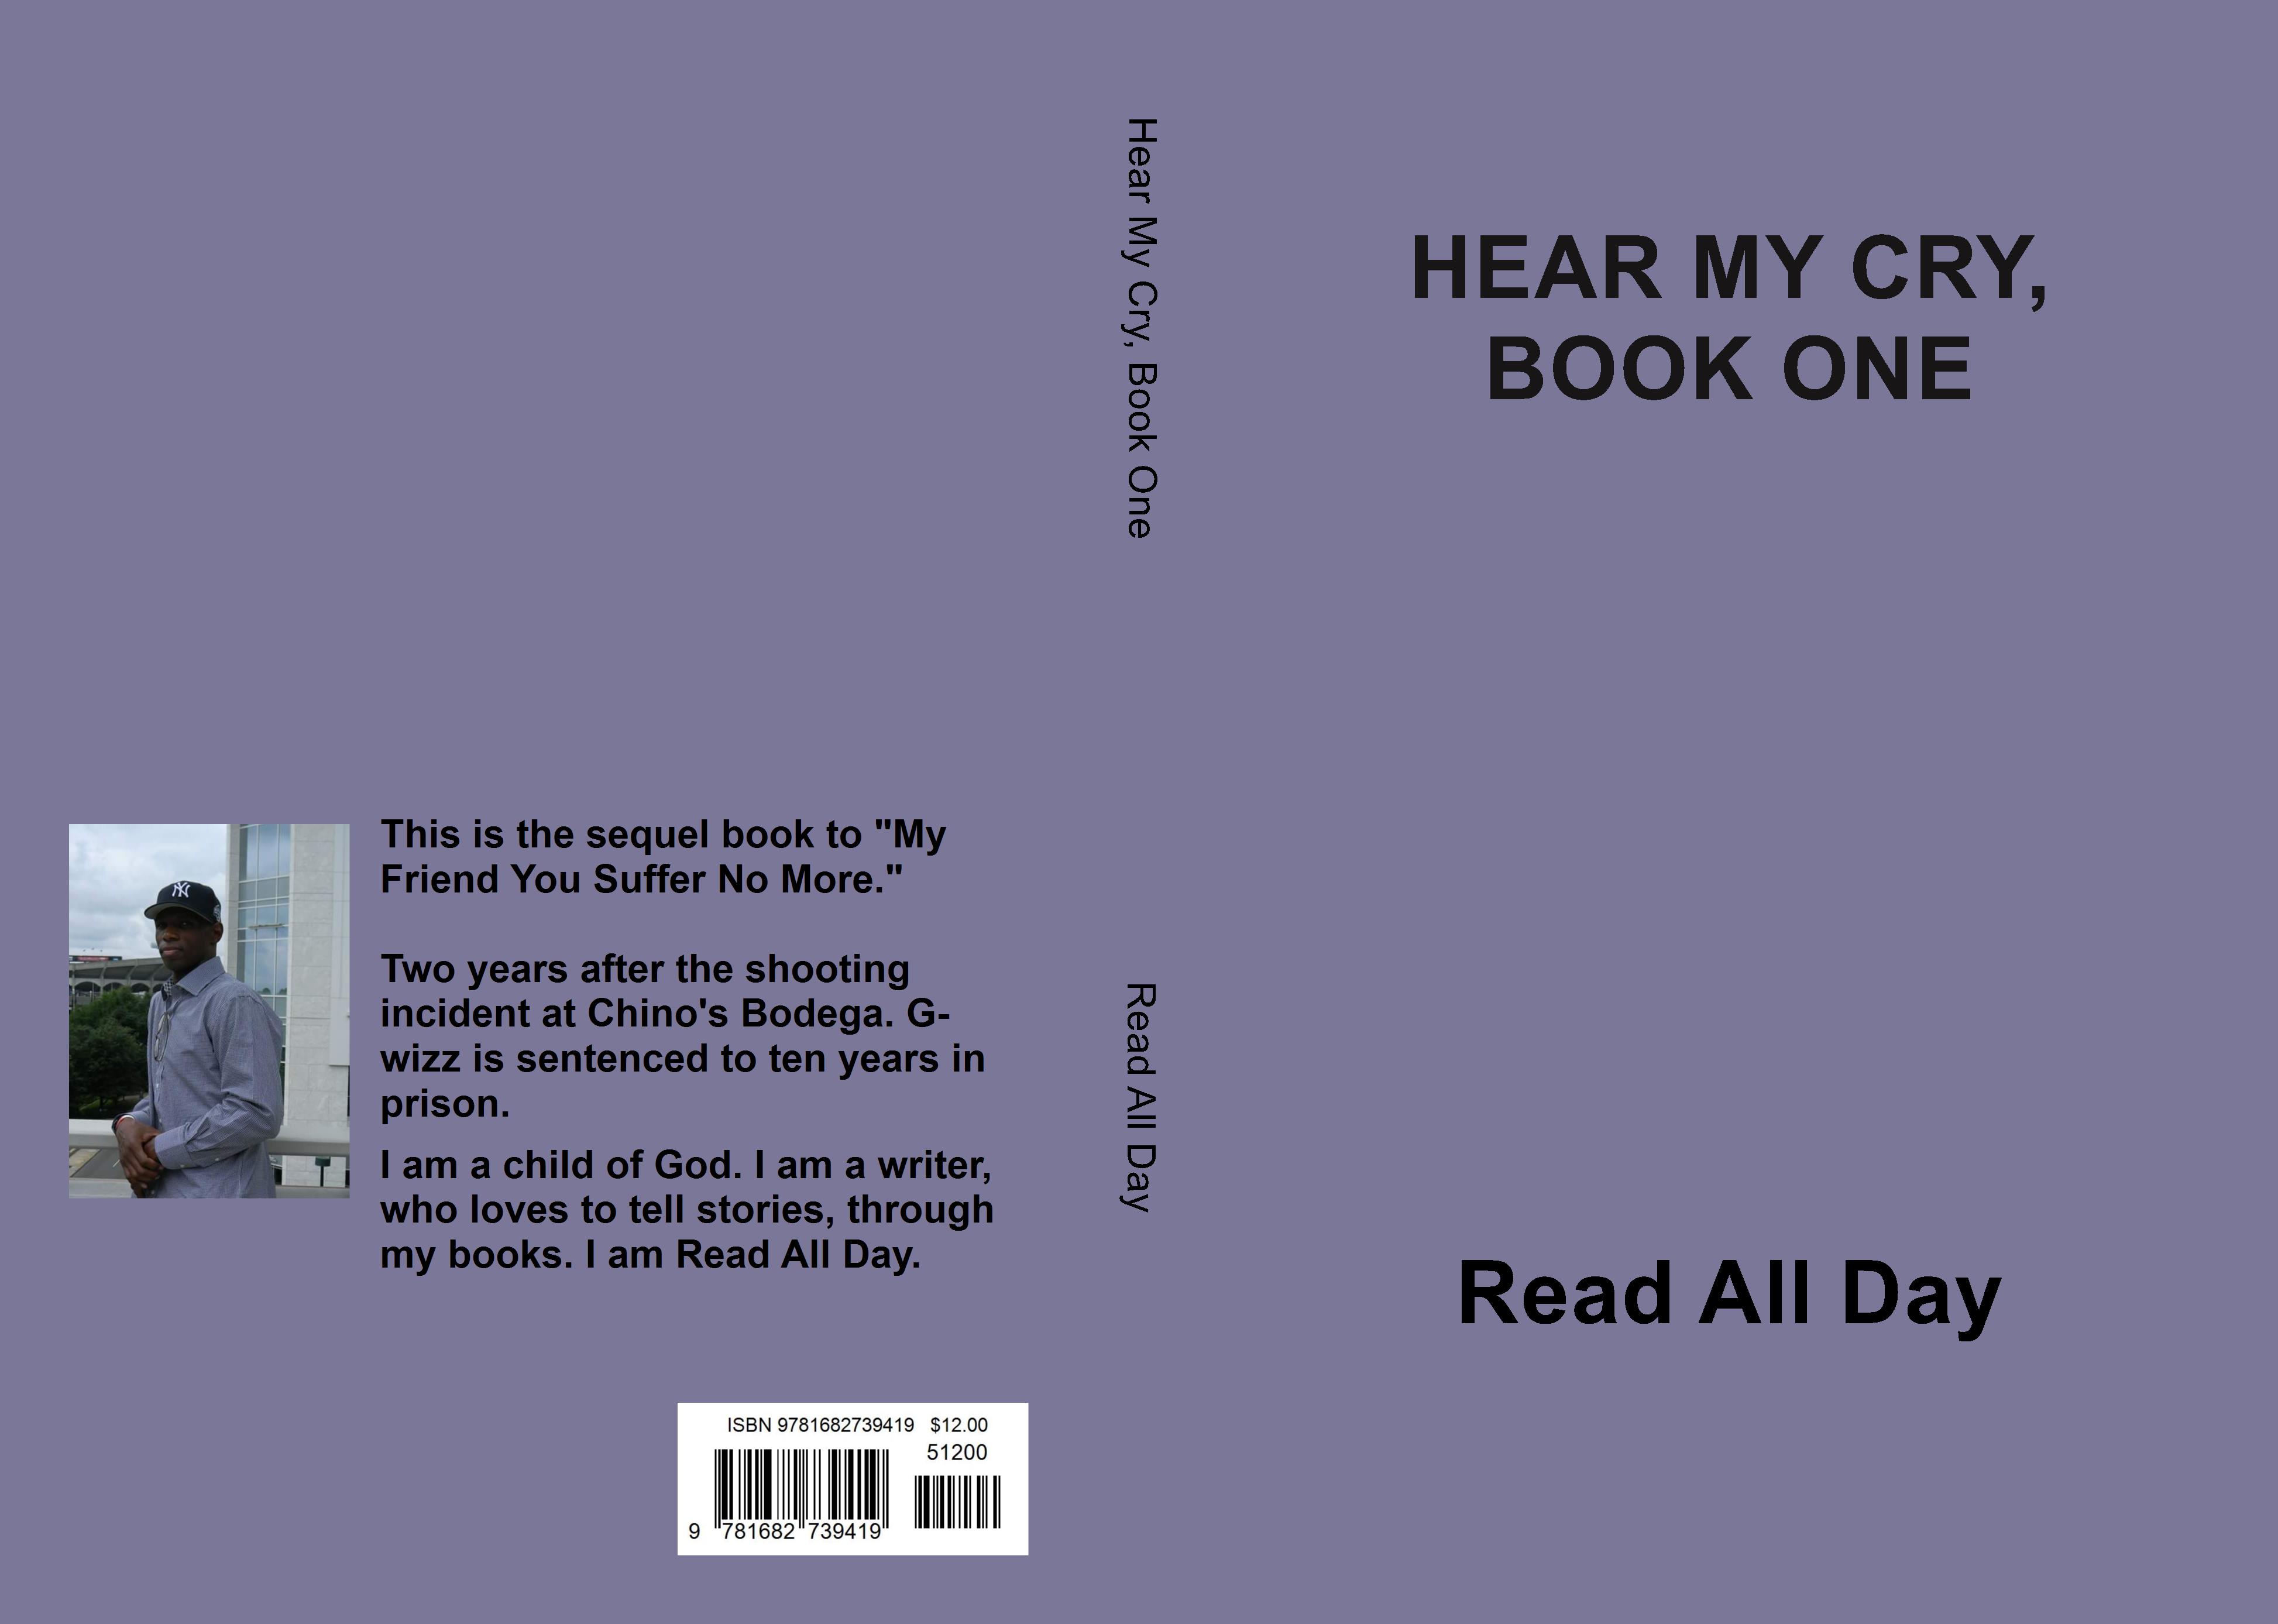 Hear My Cry cover image